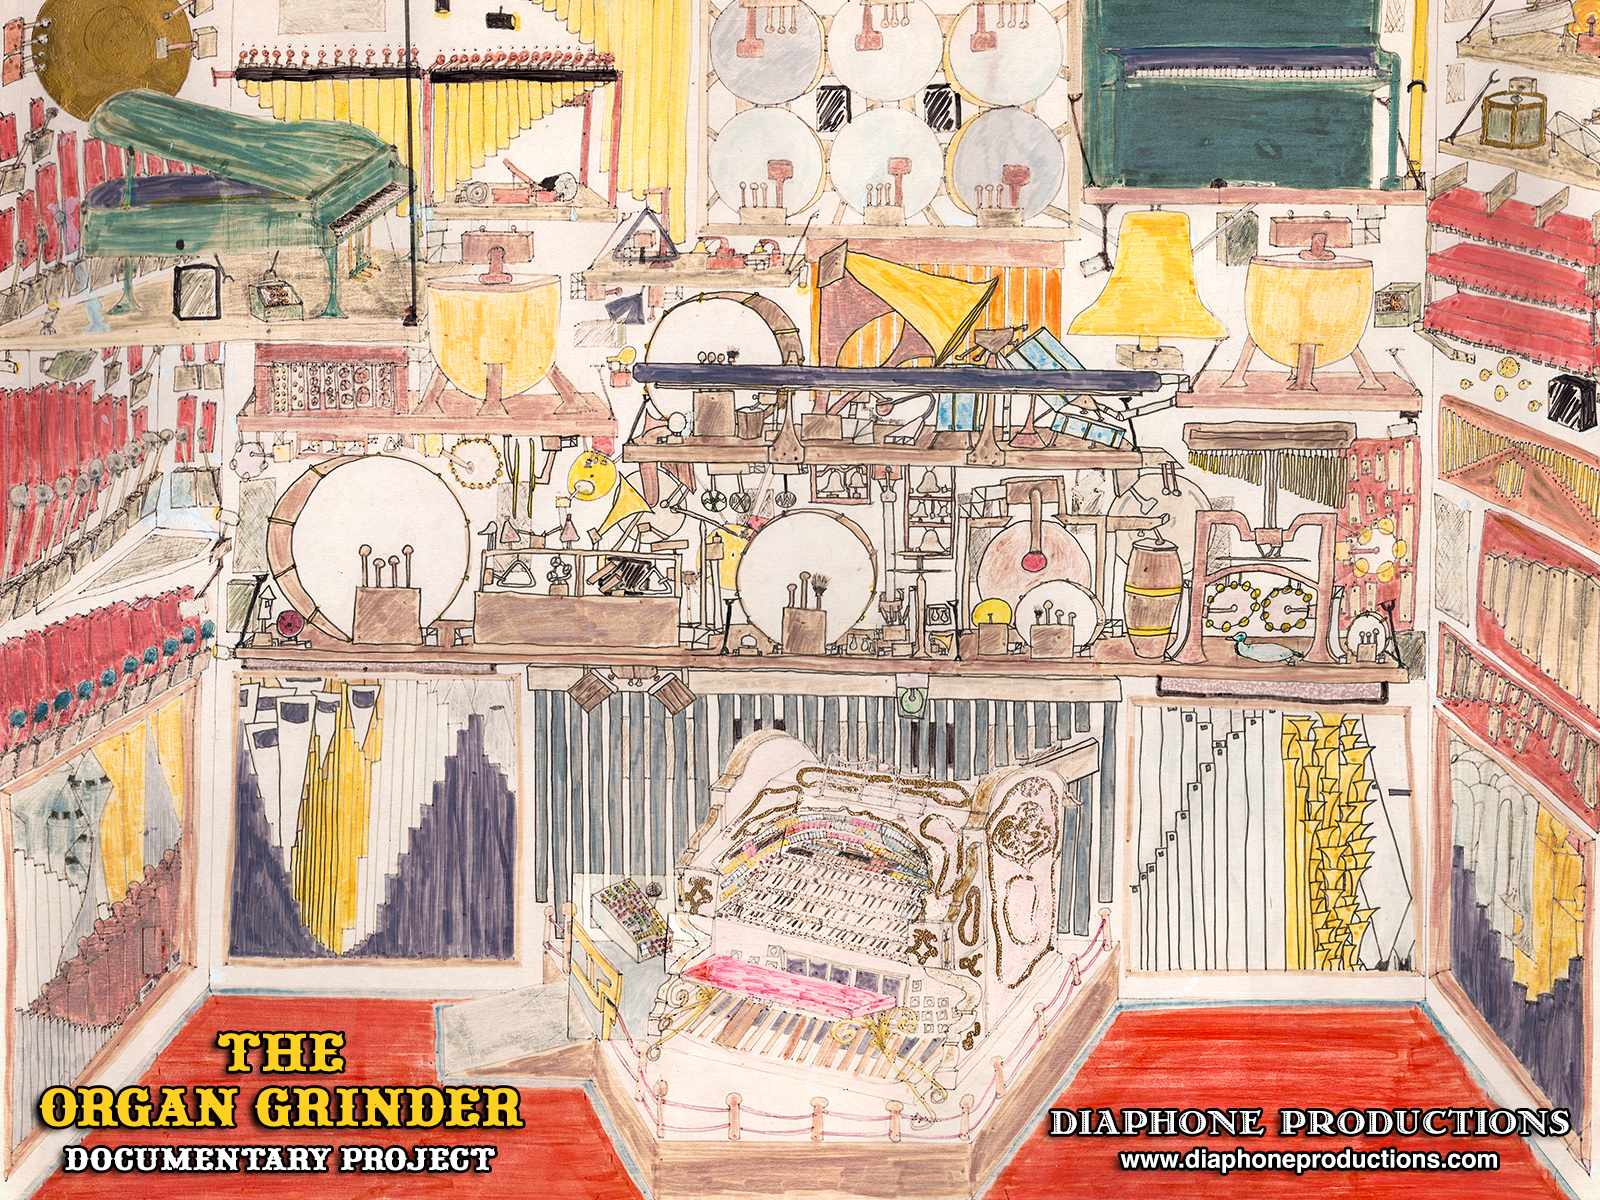 An elaborate childhood drawing in ink, colored with felt tip, of a multi-story theater pipe organ with all the bells and whistles, including two pianos.